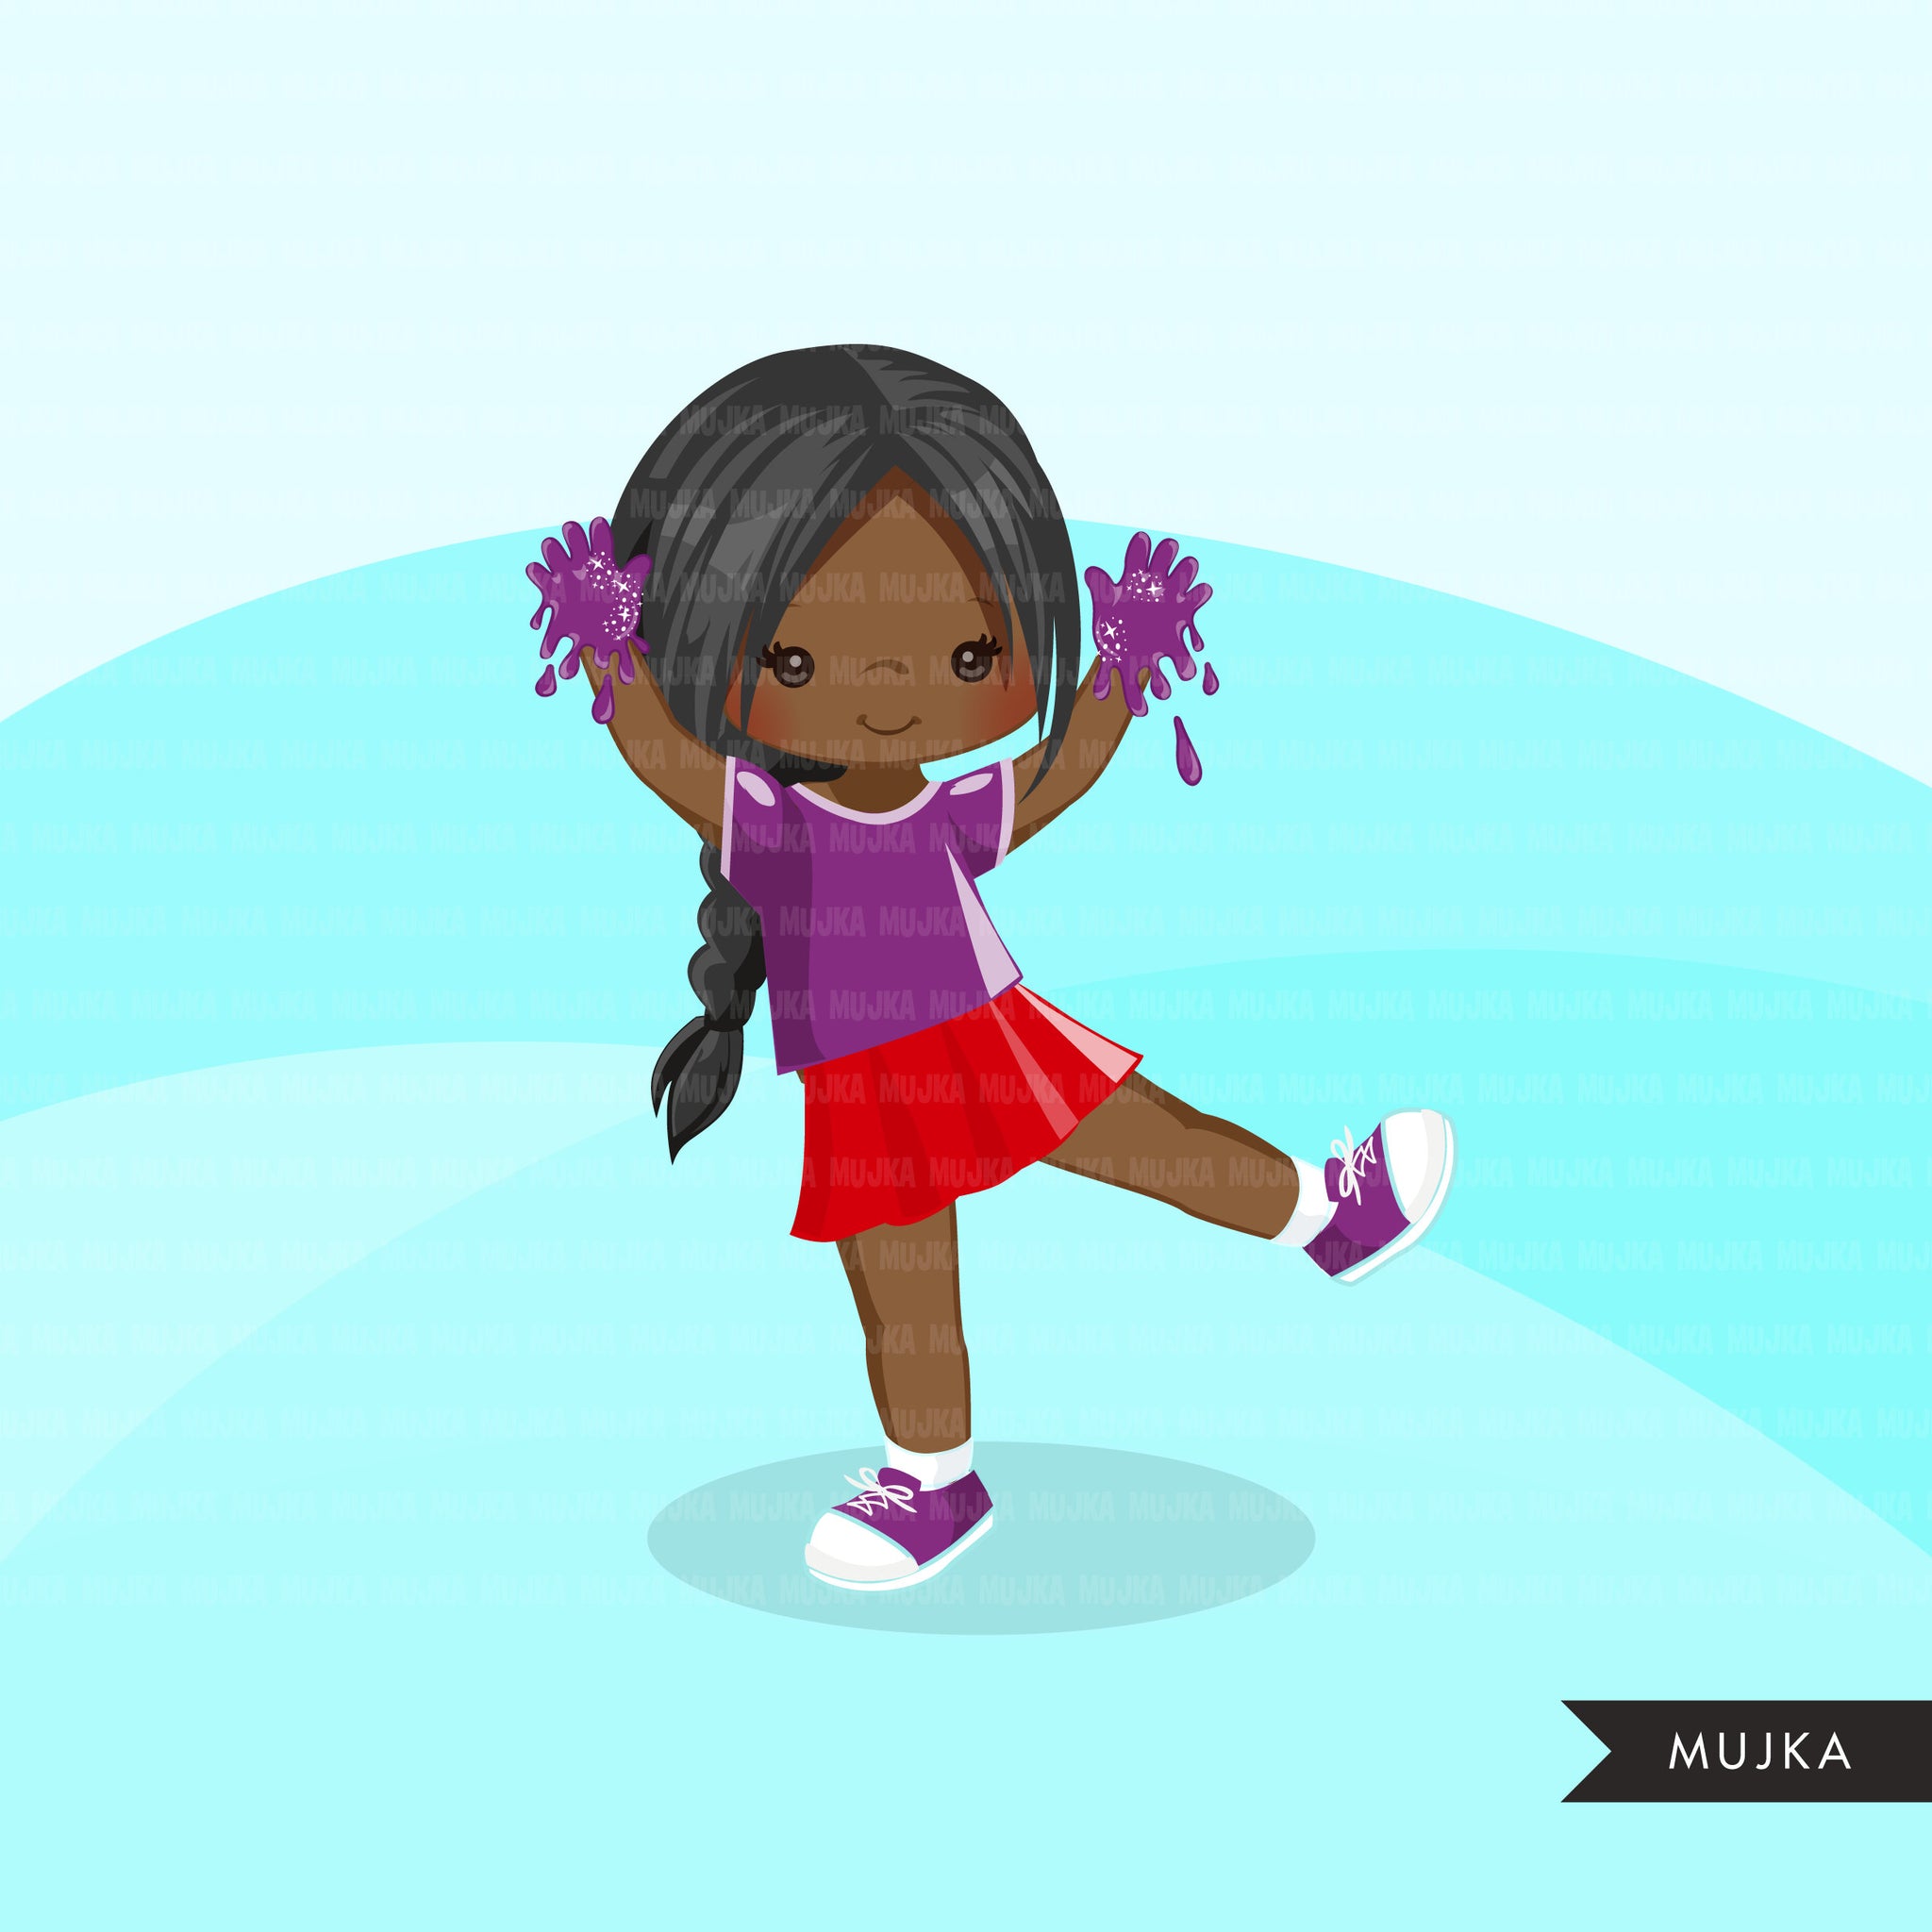 Slime party set for girl clipart